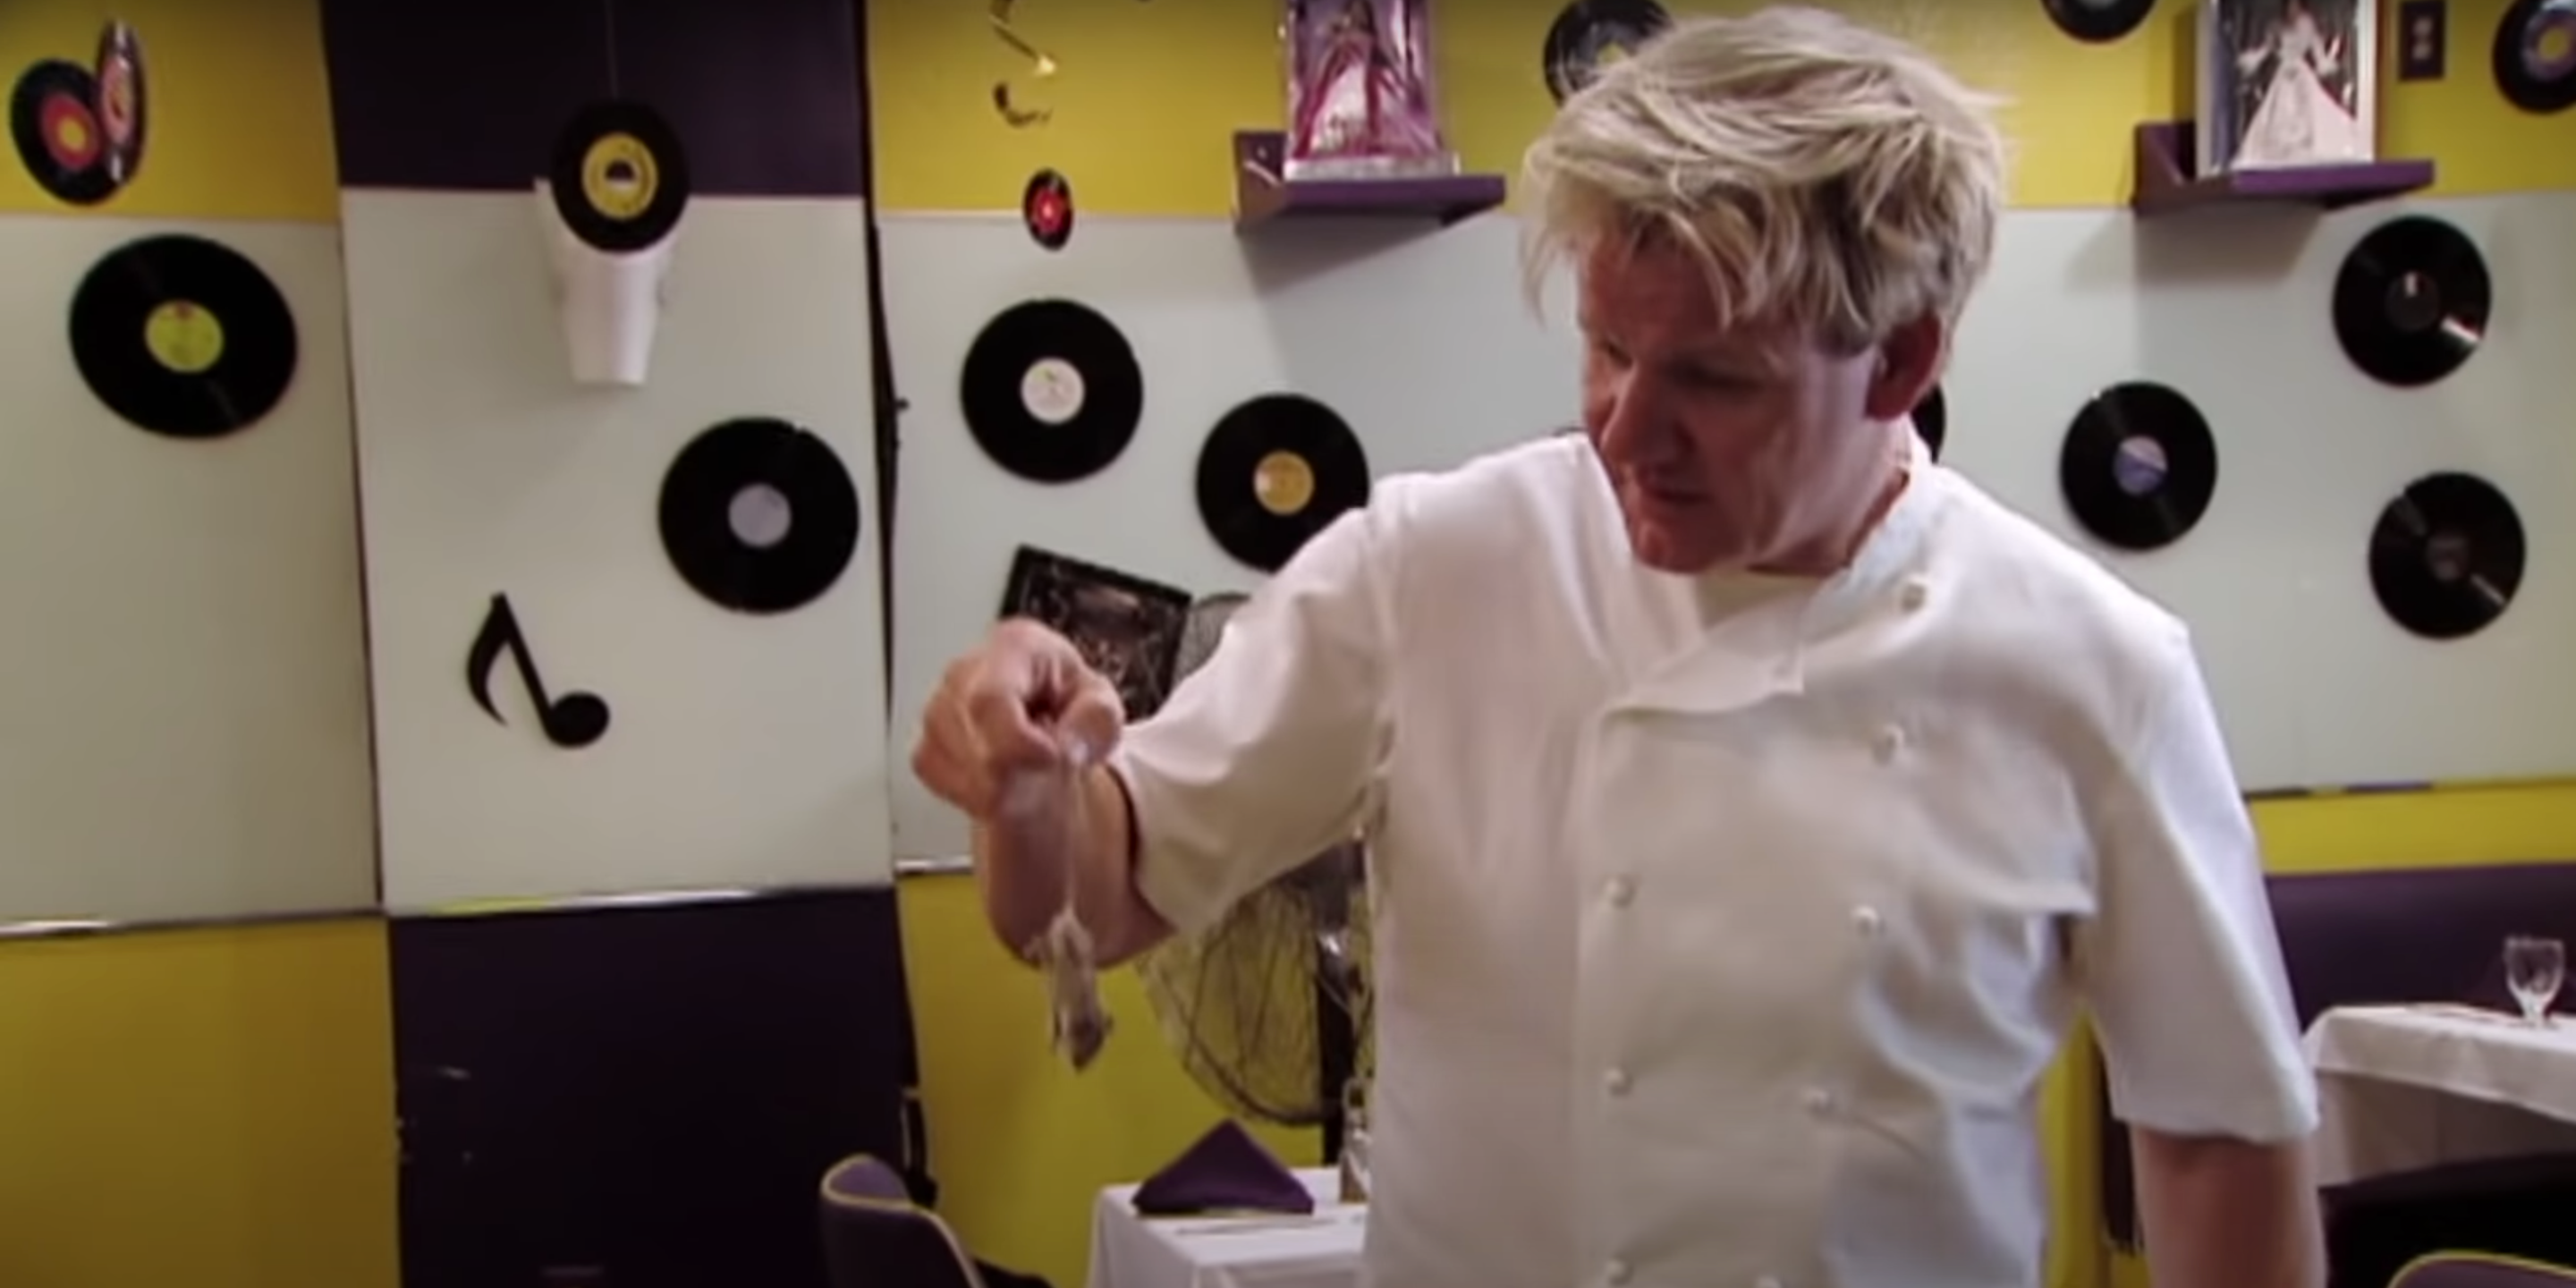 An image of Gordon Ramsay holding a dead mouse by the tail.